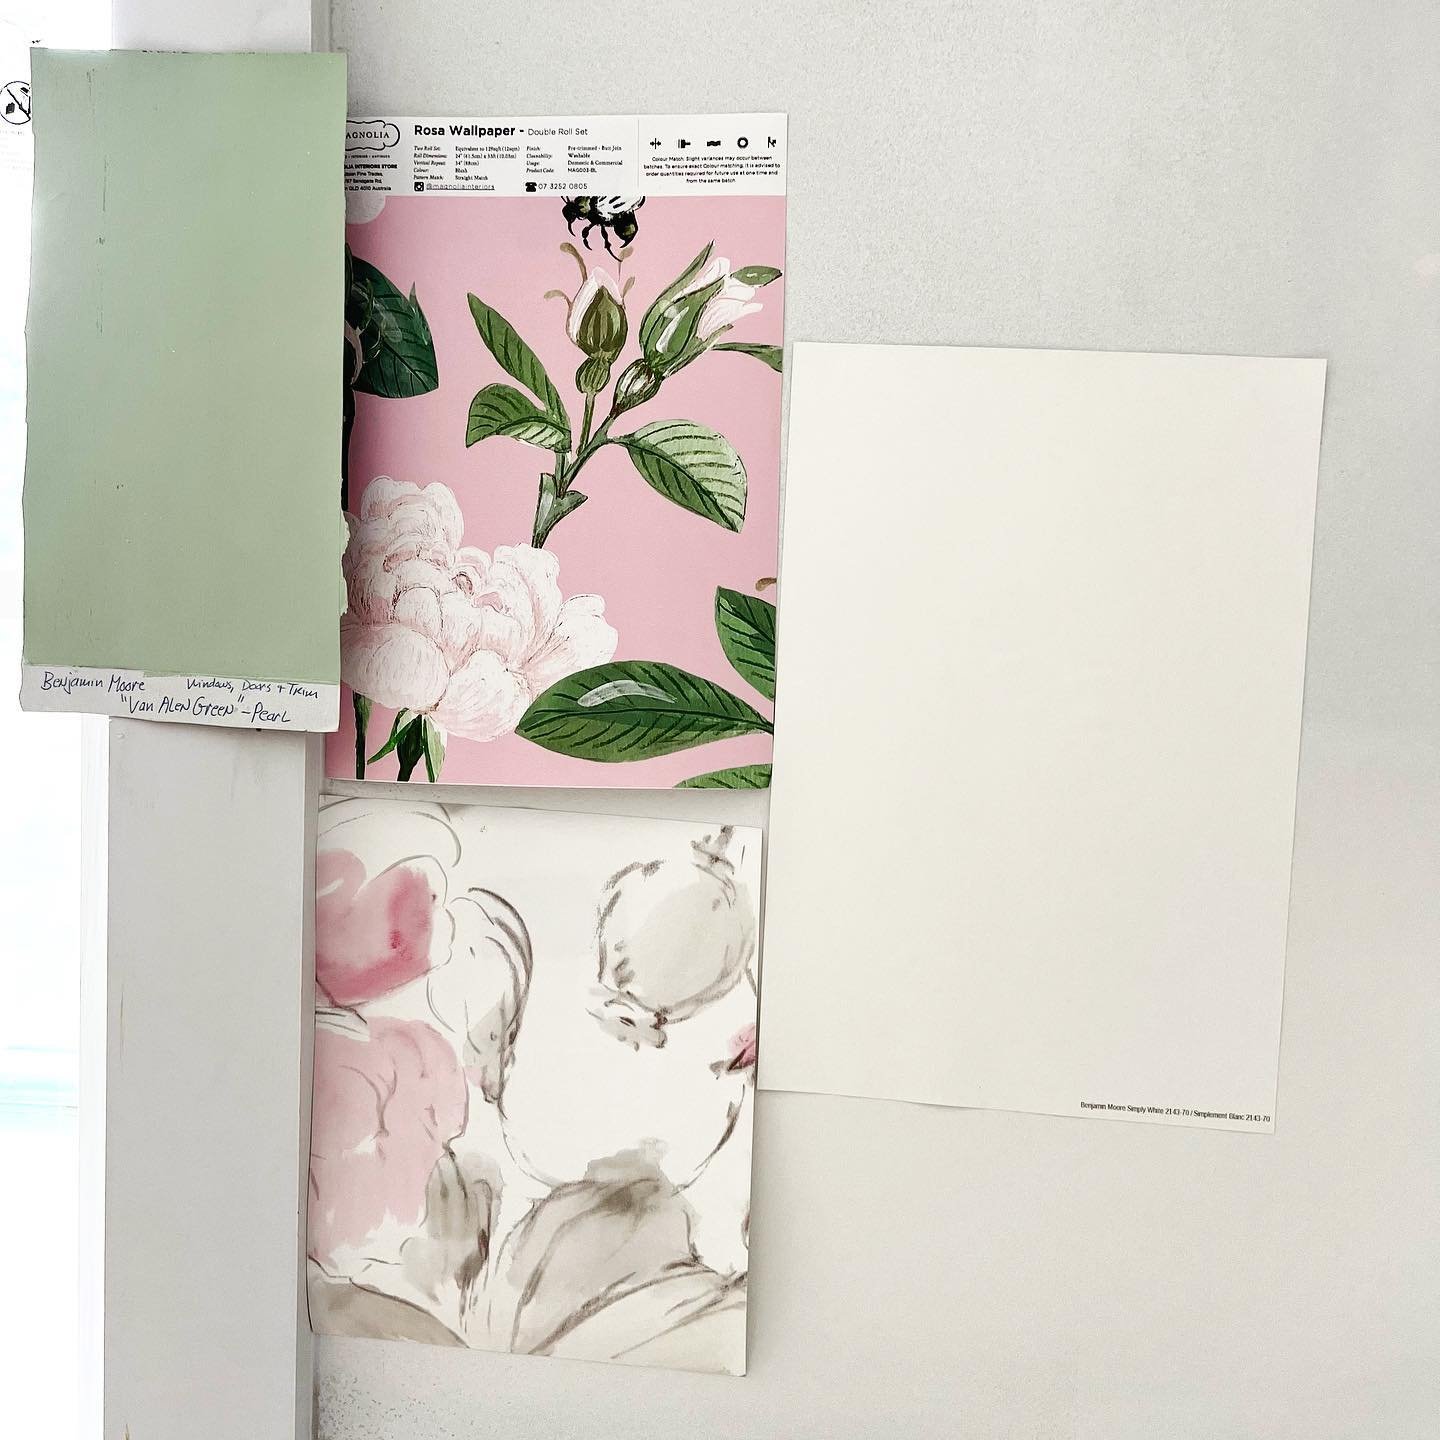 Picking out #wallpaper is ever so fun!
.
.
.
🌸
#spring #springflowers #magnolia #passionflower #dahlia #rose #lupine #pink #green #greens #pinks #yellow #flowergarden #blumen #fr&uuml;hling #mural #floral #floralpattern #leaves #jungle #rainforest #